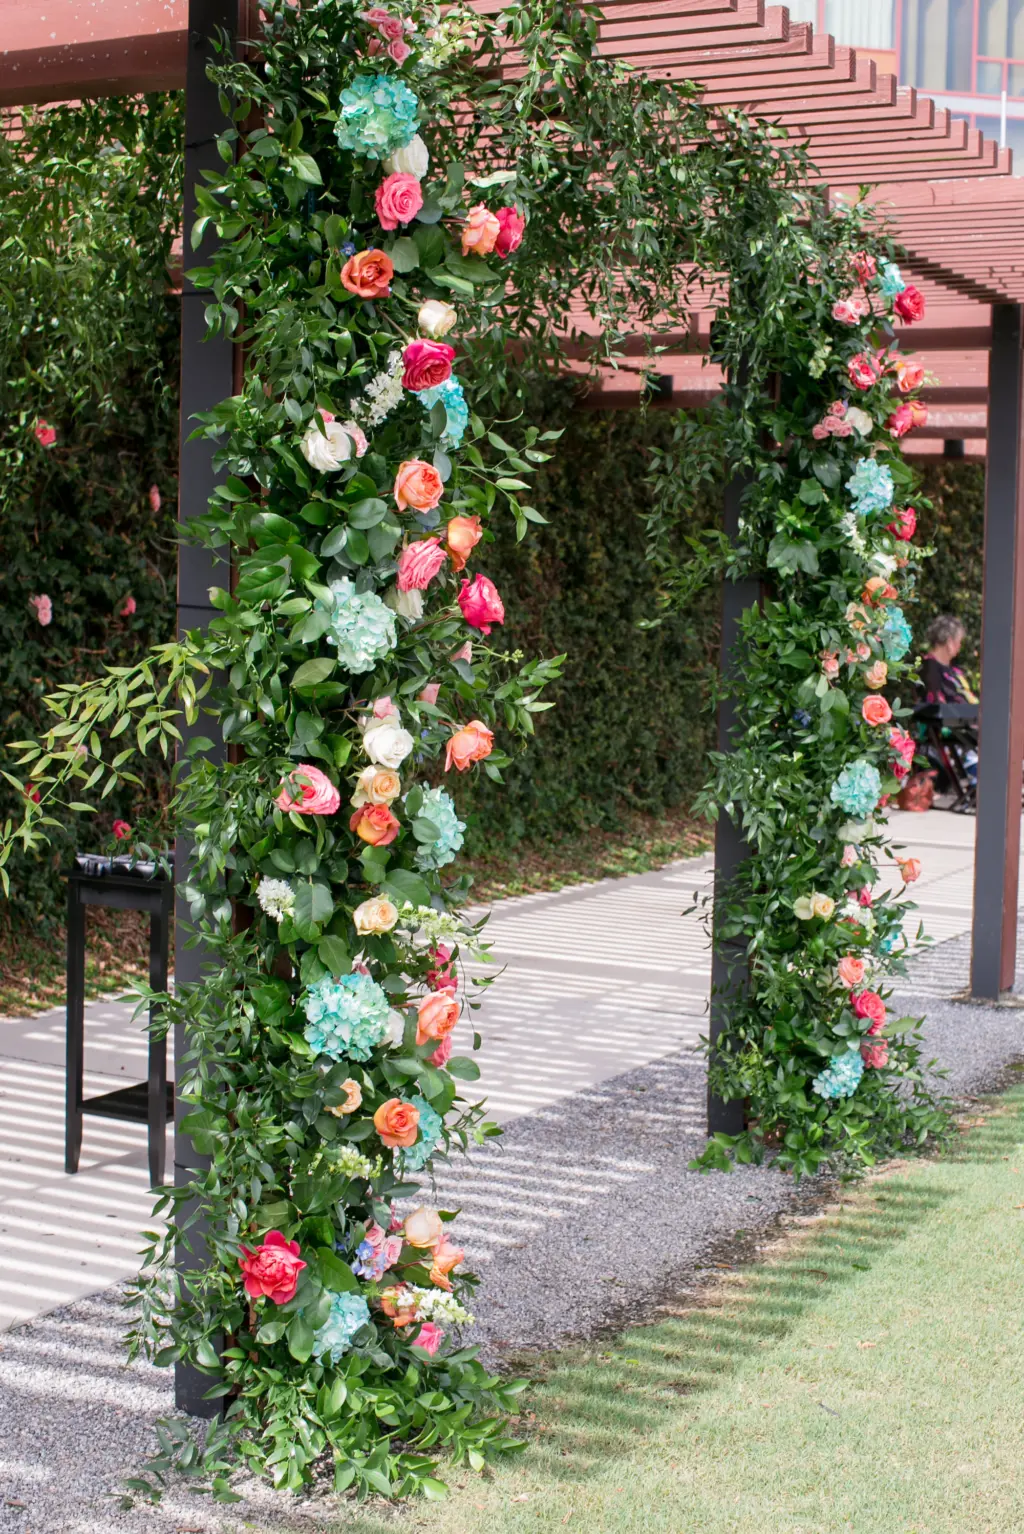 Unique Floral and Greenery Wedding Arch Inspiration with Orange, Turquoise, and Pink Floral Details | Central Florida Wedding Florist Monarch Events and Designs